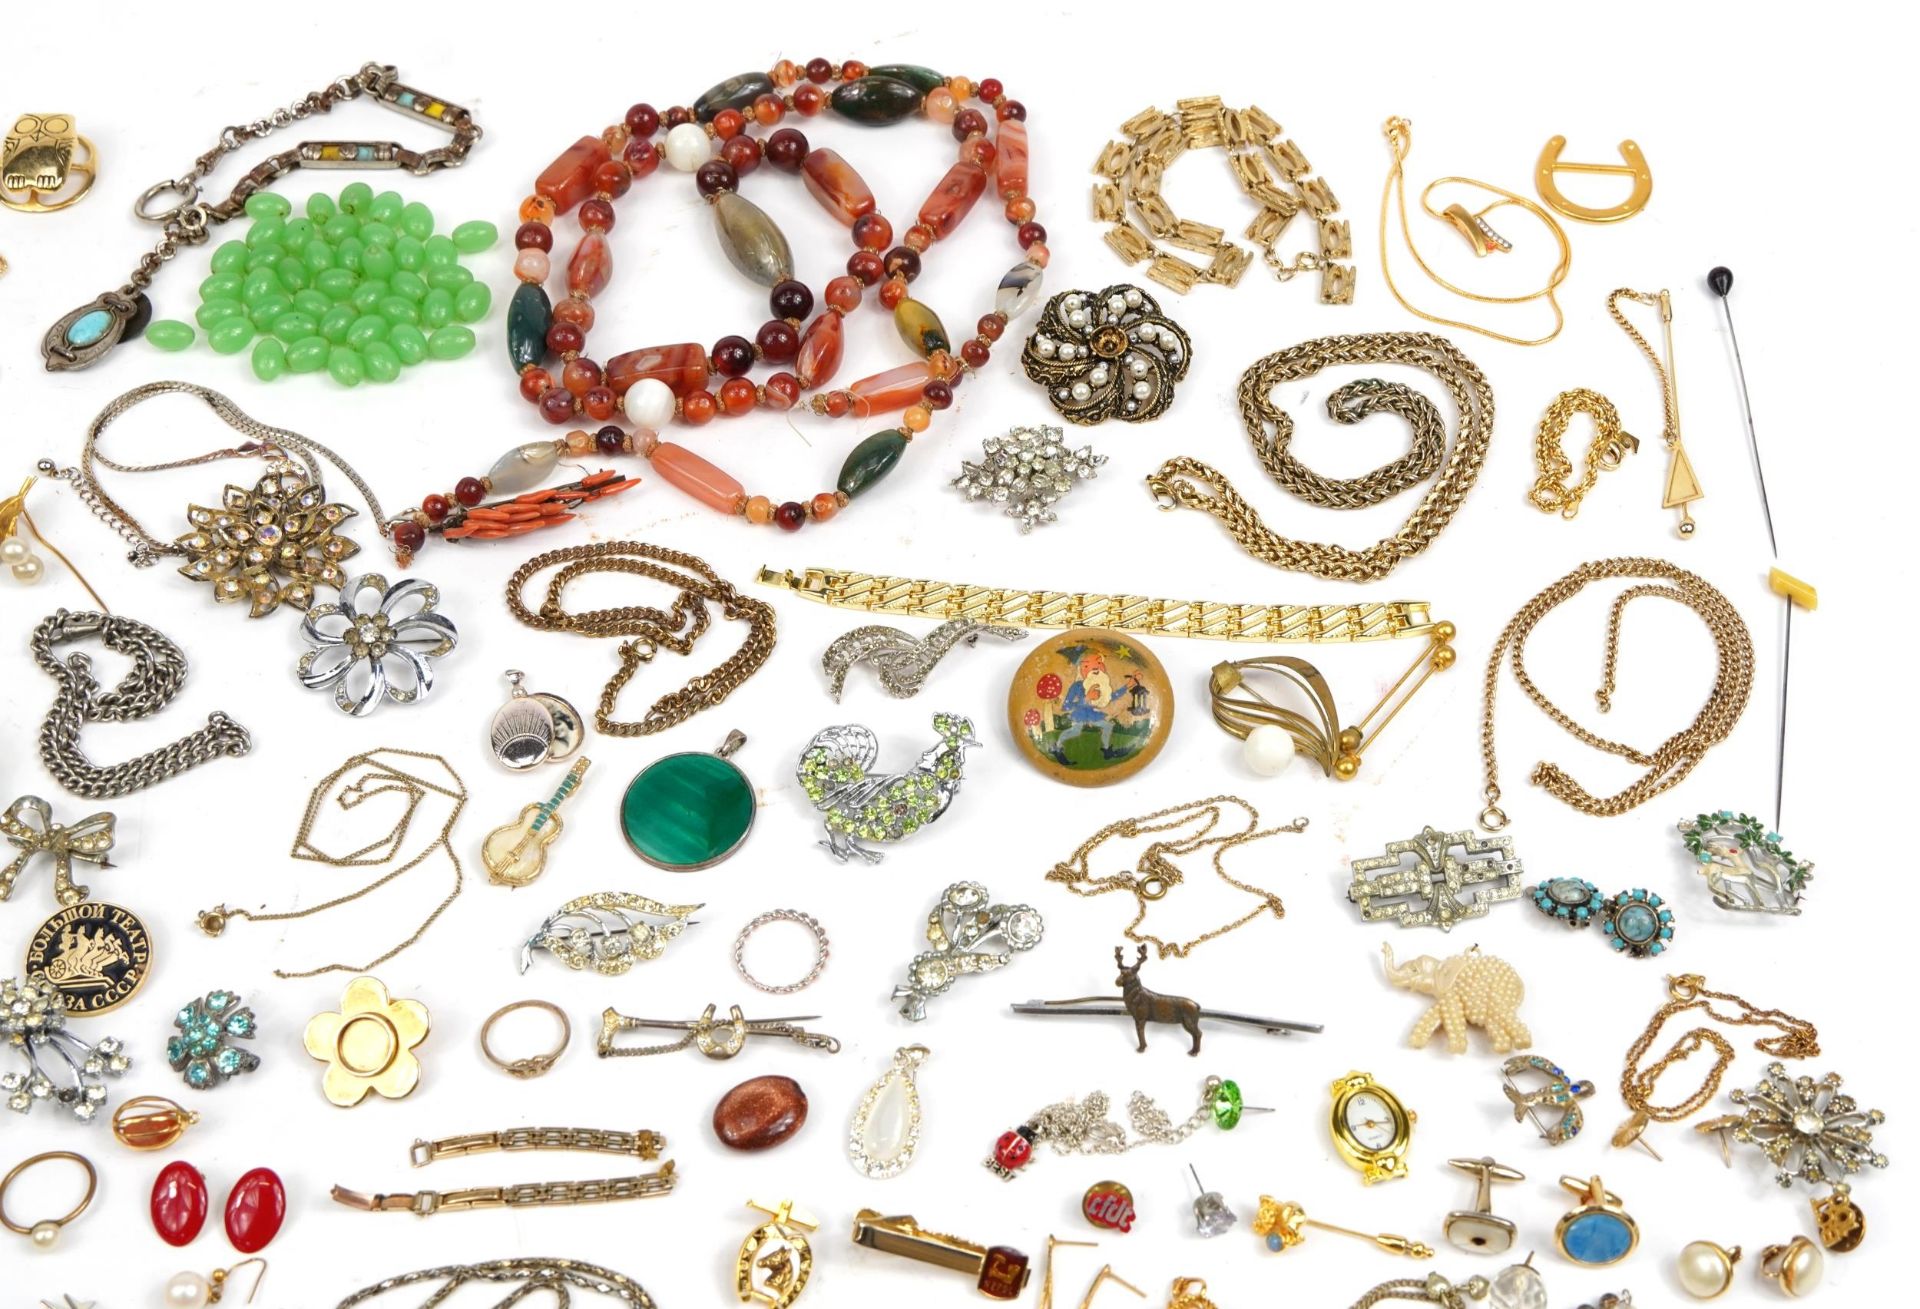 Vintage and later costume jewellery including brooches, necklaces, bracelets and earrings - Image 3 of 5